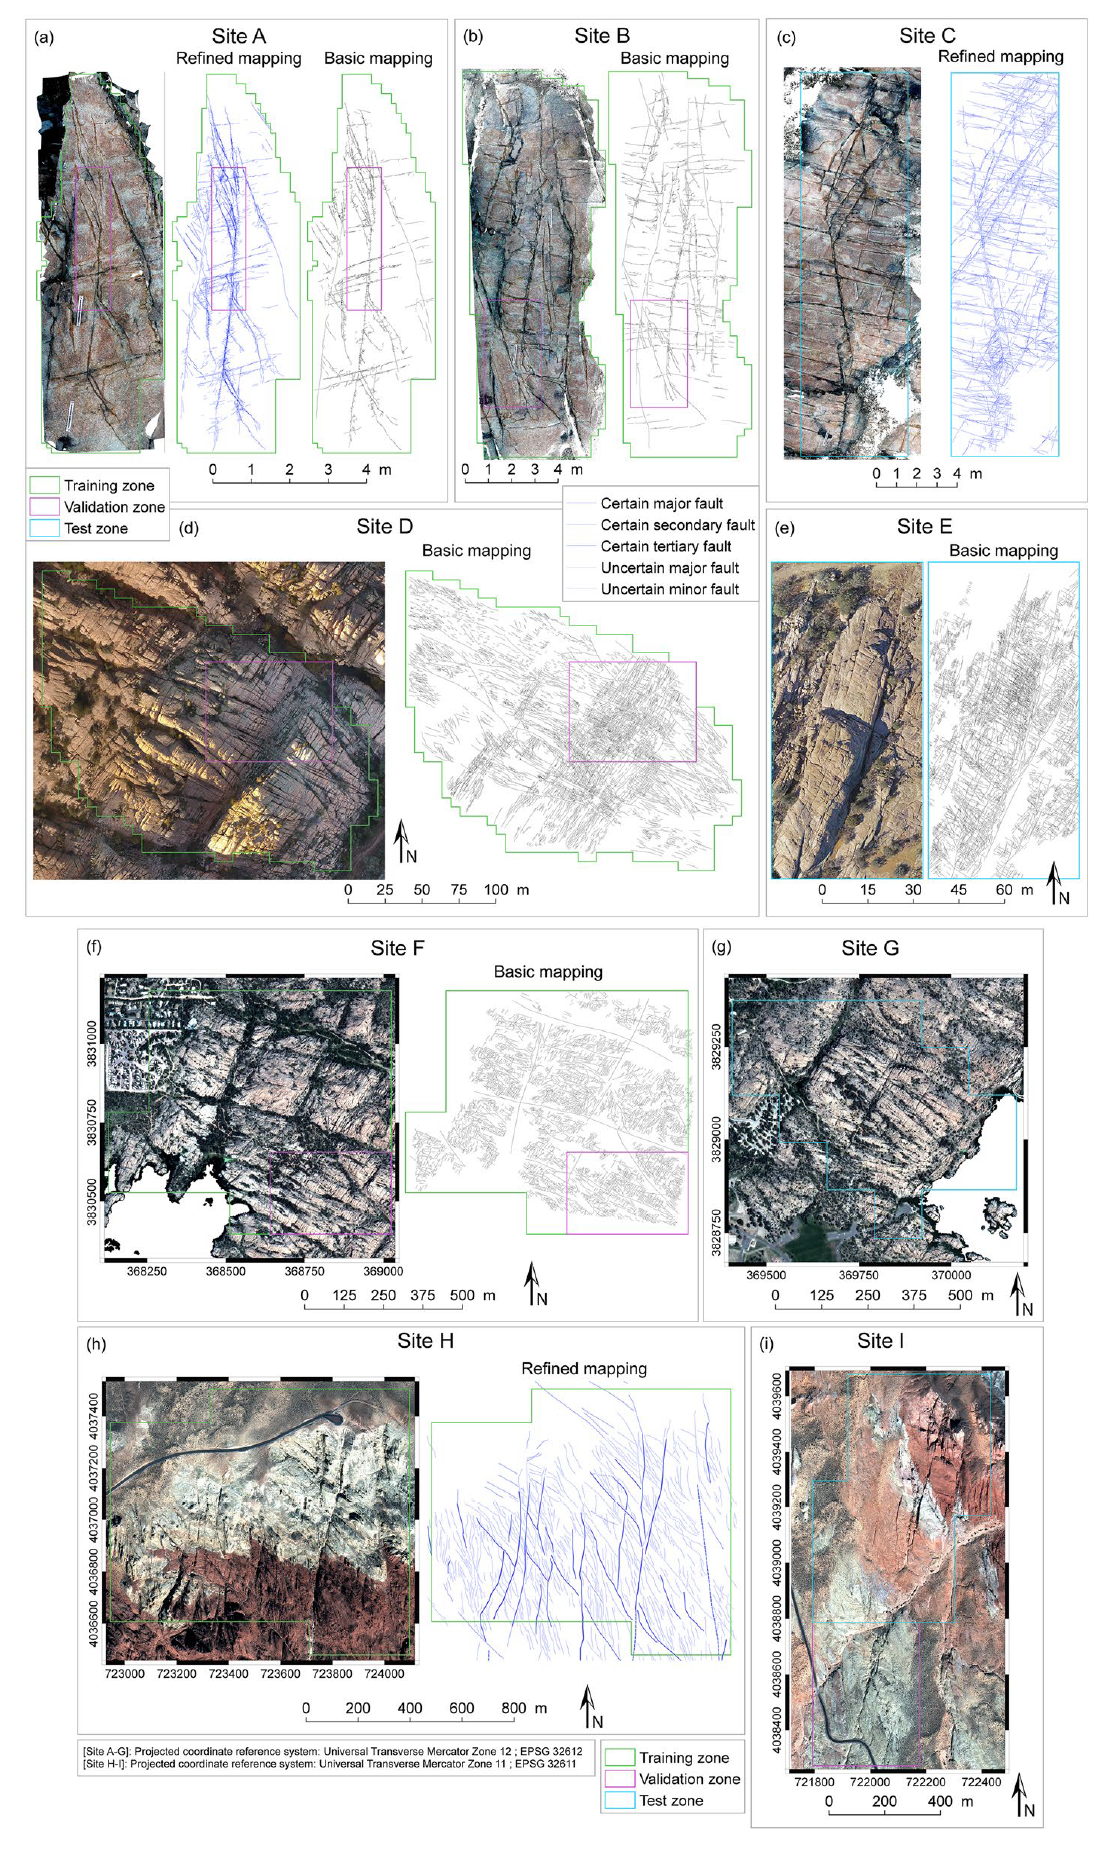 Sites, images, and ground truth fault maps used in present study. (a–g) from Granite Dells site, (h–i) from Valley of Fire site. (a–c): hand-held camera ground images, (d and e): drone images, (f–i): Pléiades satellite images (ID in data statement). Training, validation and test zones are indicated in green, purple and blue, respectively. Sites C and G are only used as test zones. Basic (black) and refined (blue) mapping were done manually (not shown on Site I for figure clarity). Fault hierarchy is indicated only in refined maps in (a, c, and h) through different line thicknesses, but is most visible when zooming the figures out. Dotted lines are for uncertain fractures and faults. Note, in most sites, the very high density of fractures and faults, the existence of different fault families with various orientations, and the presence of non-tectonic features.